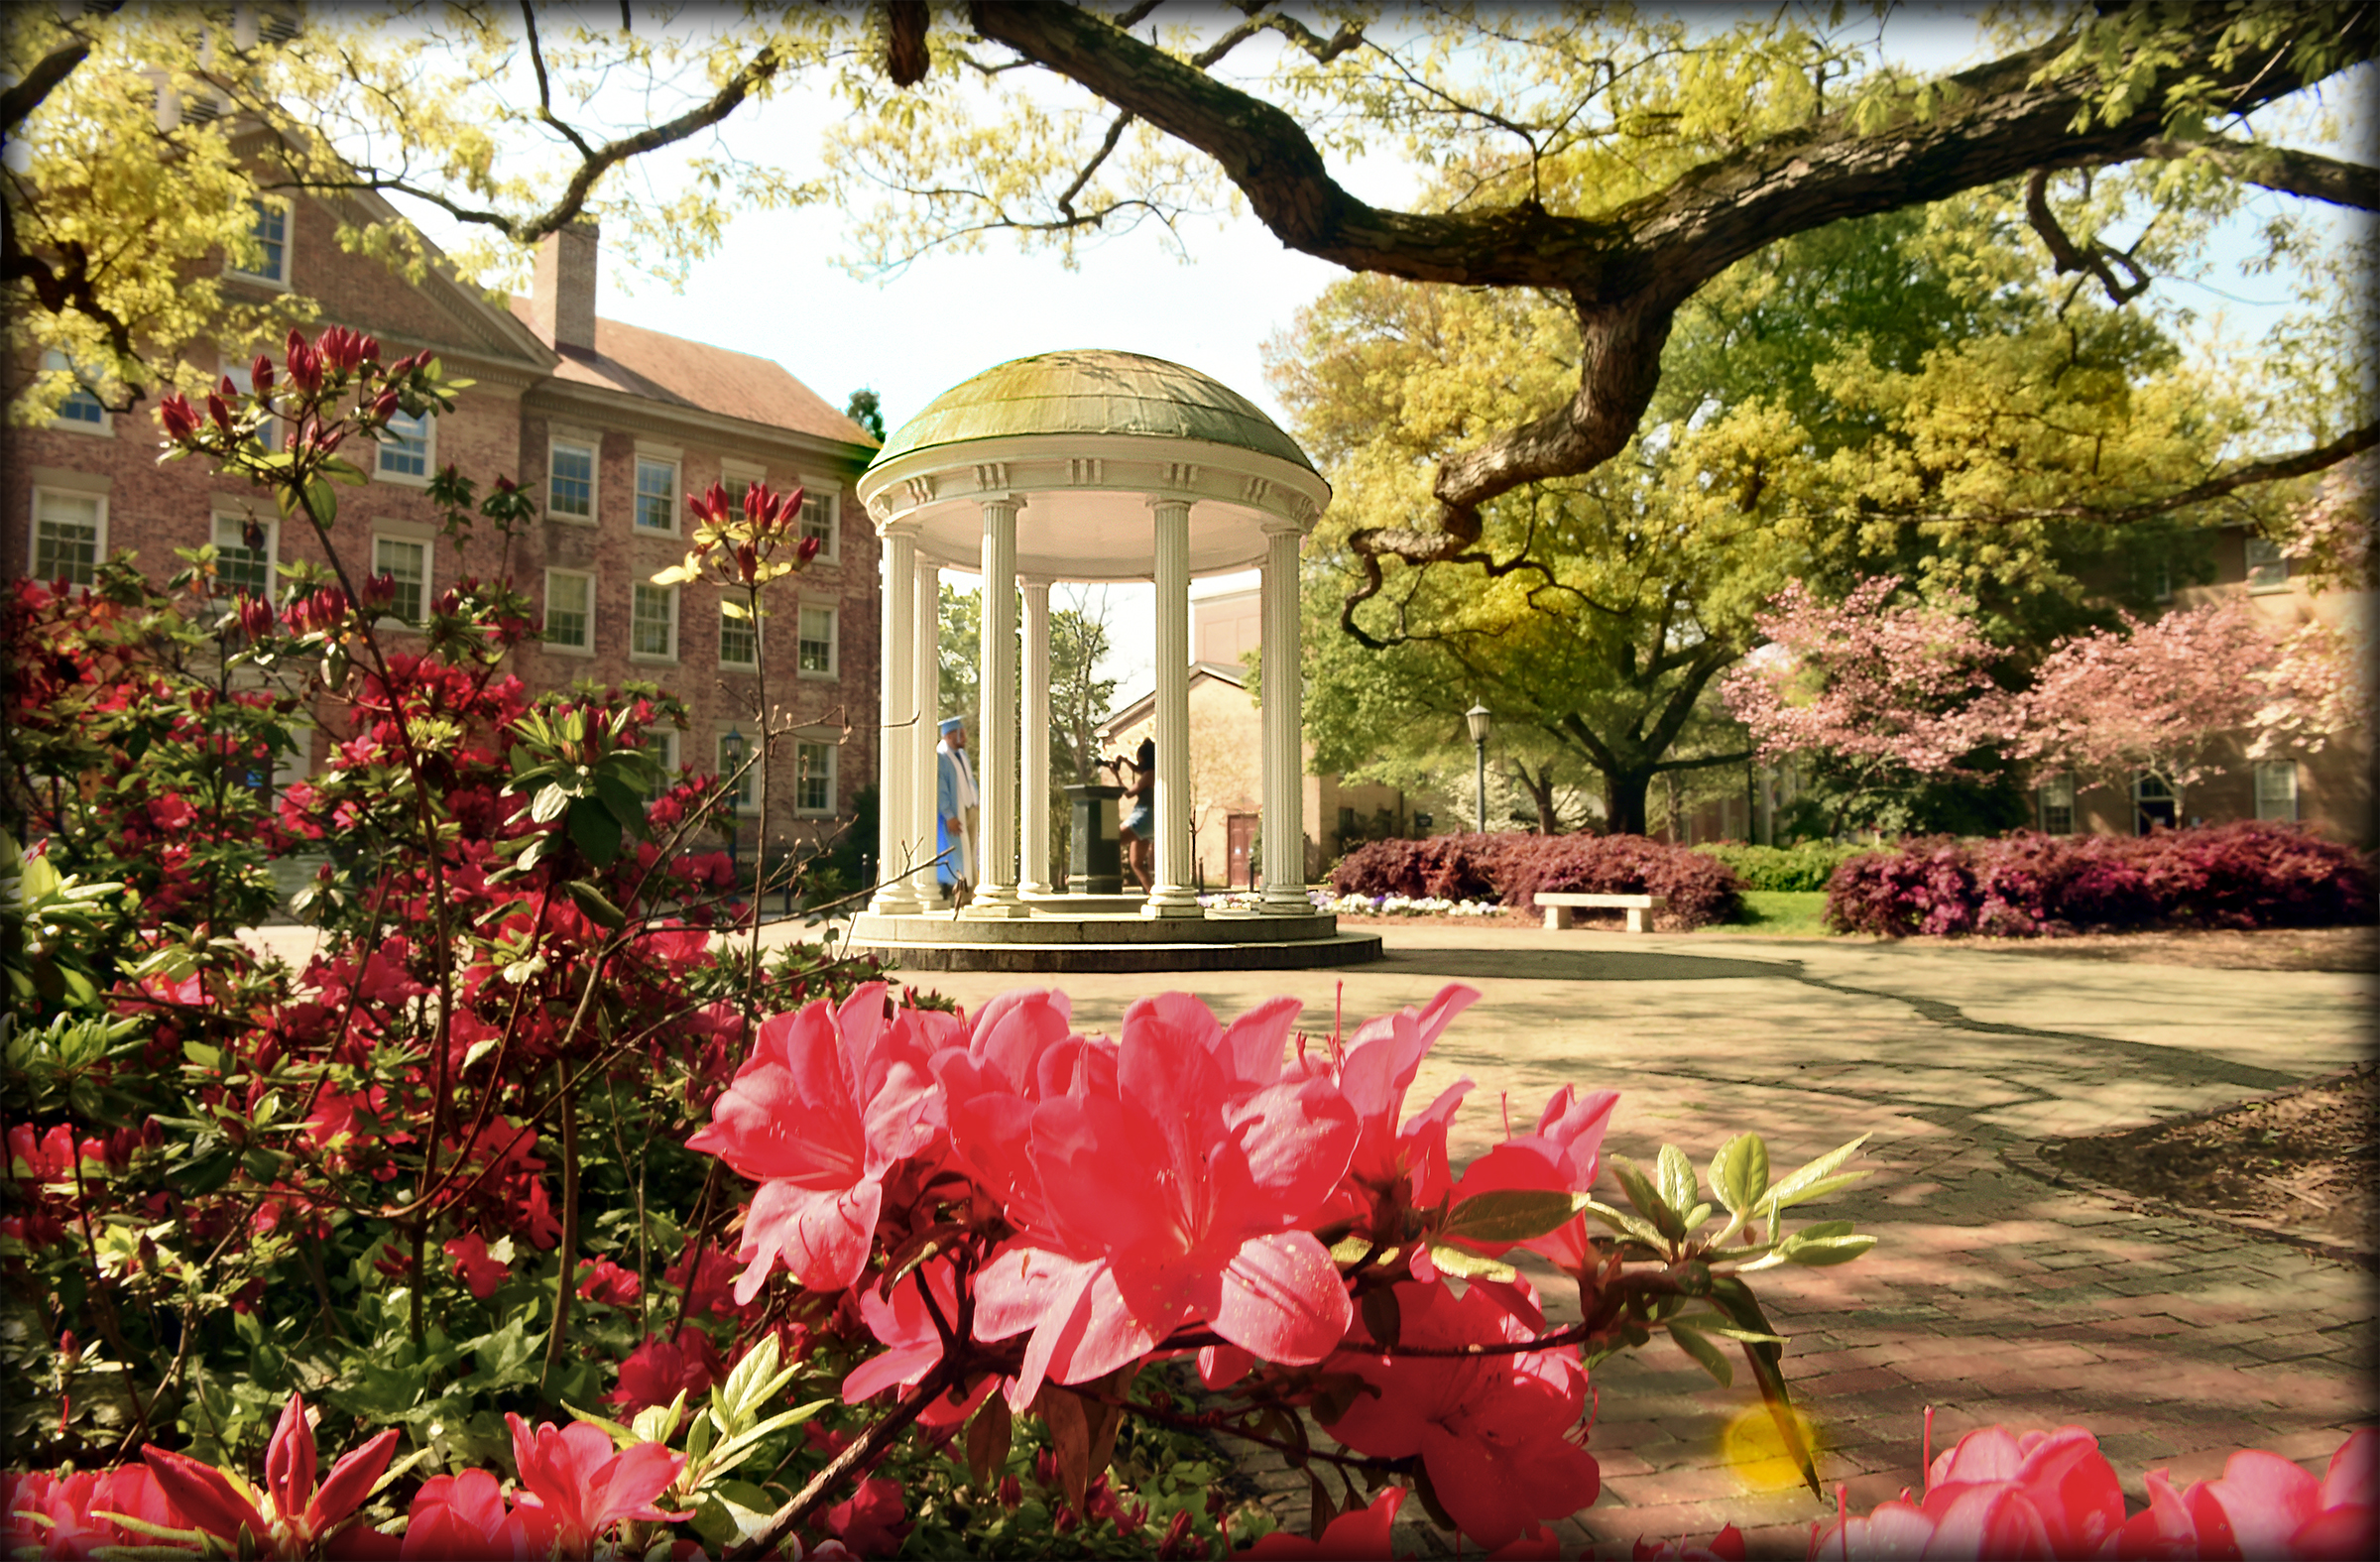 Spring 2021 photo of the Old Well with azaleas blooming by Donn Young.